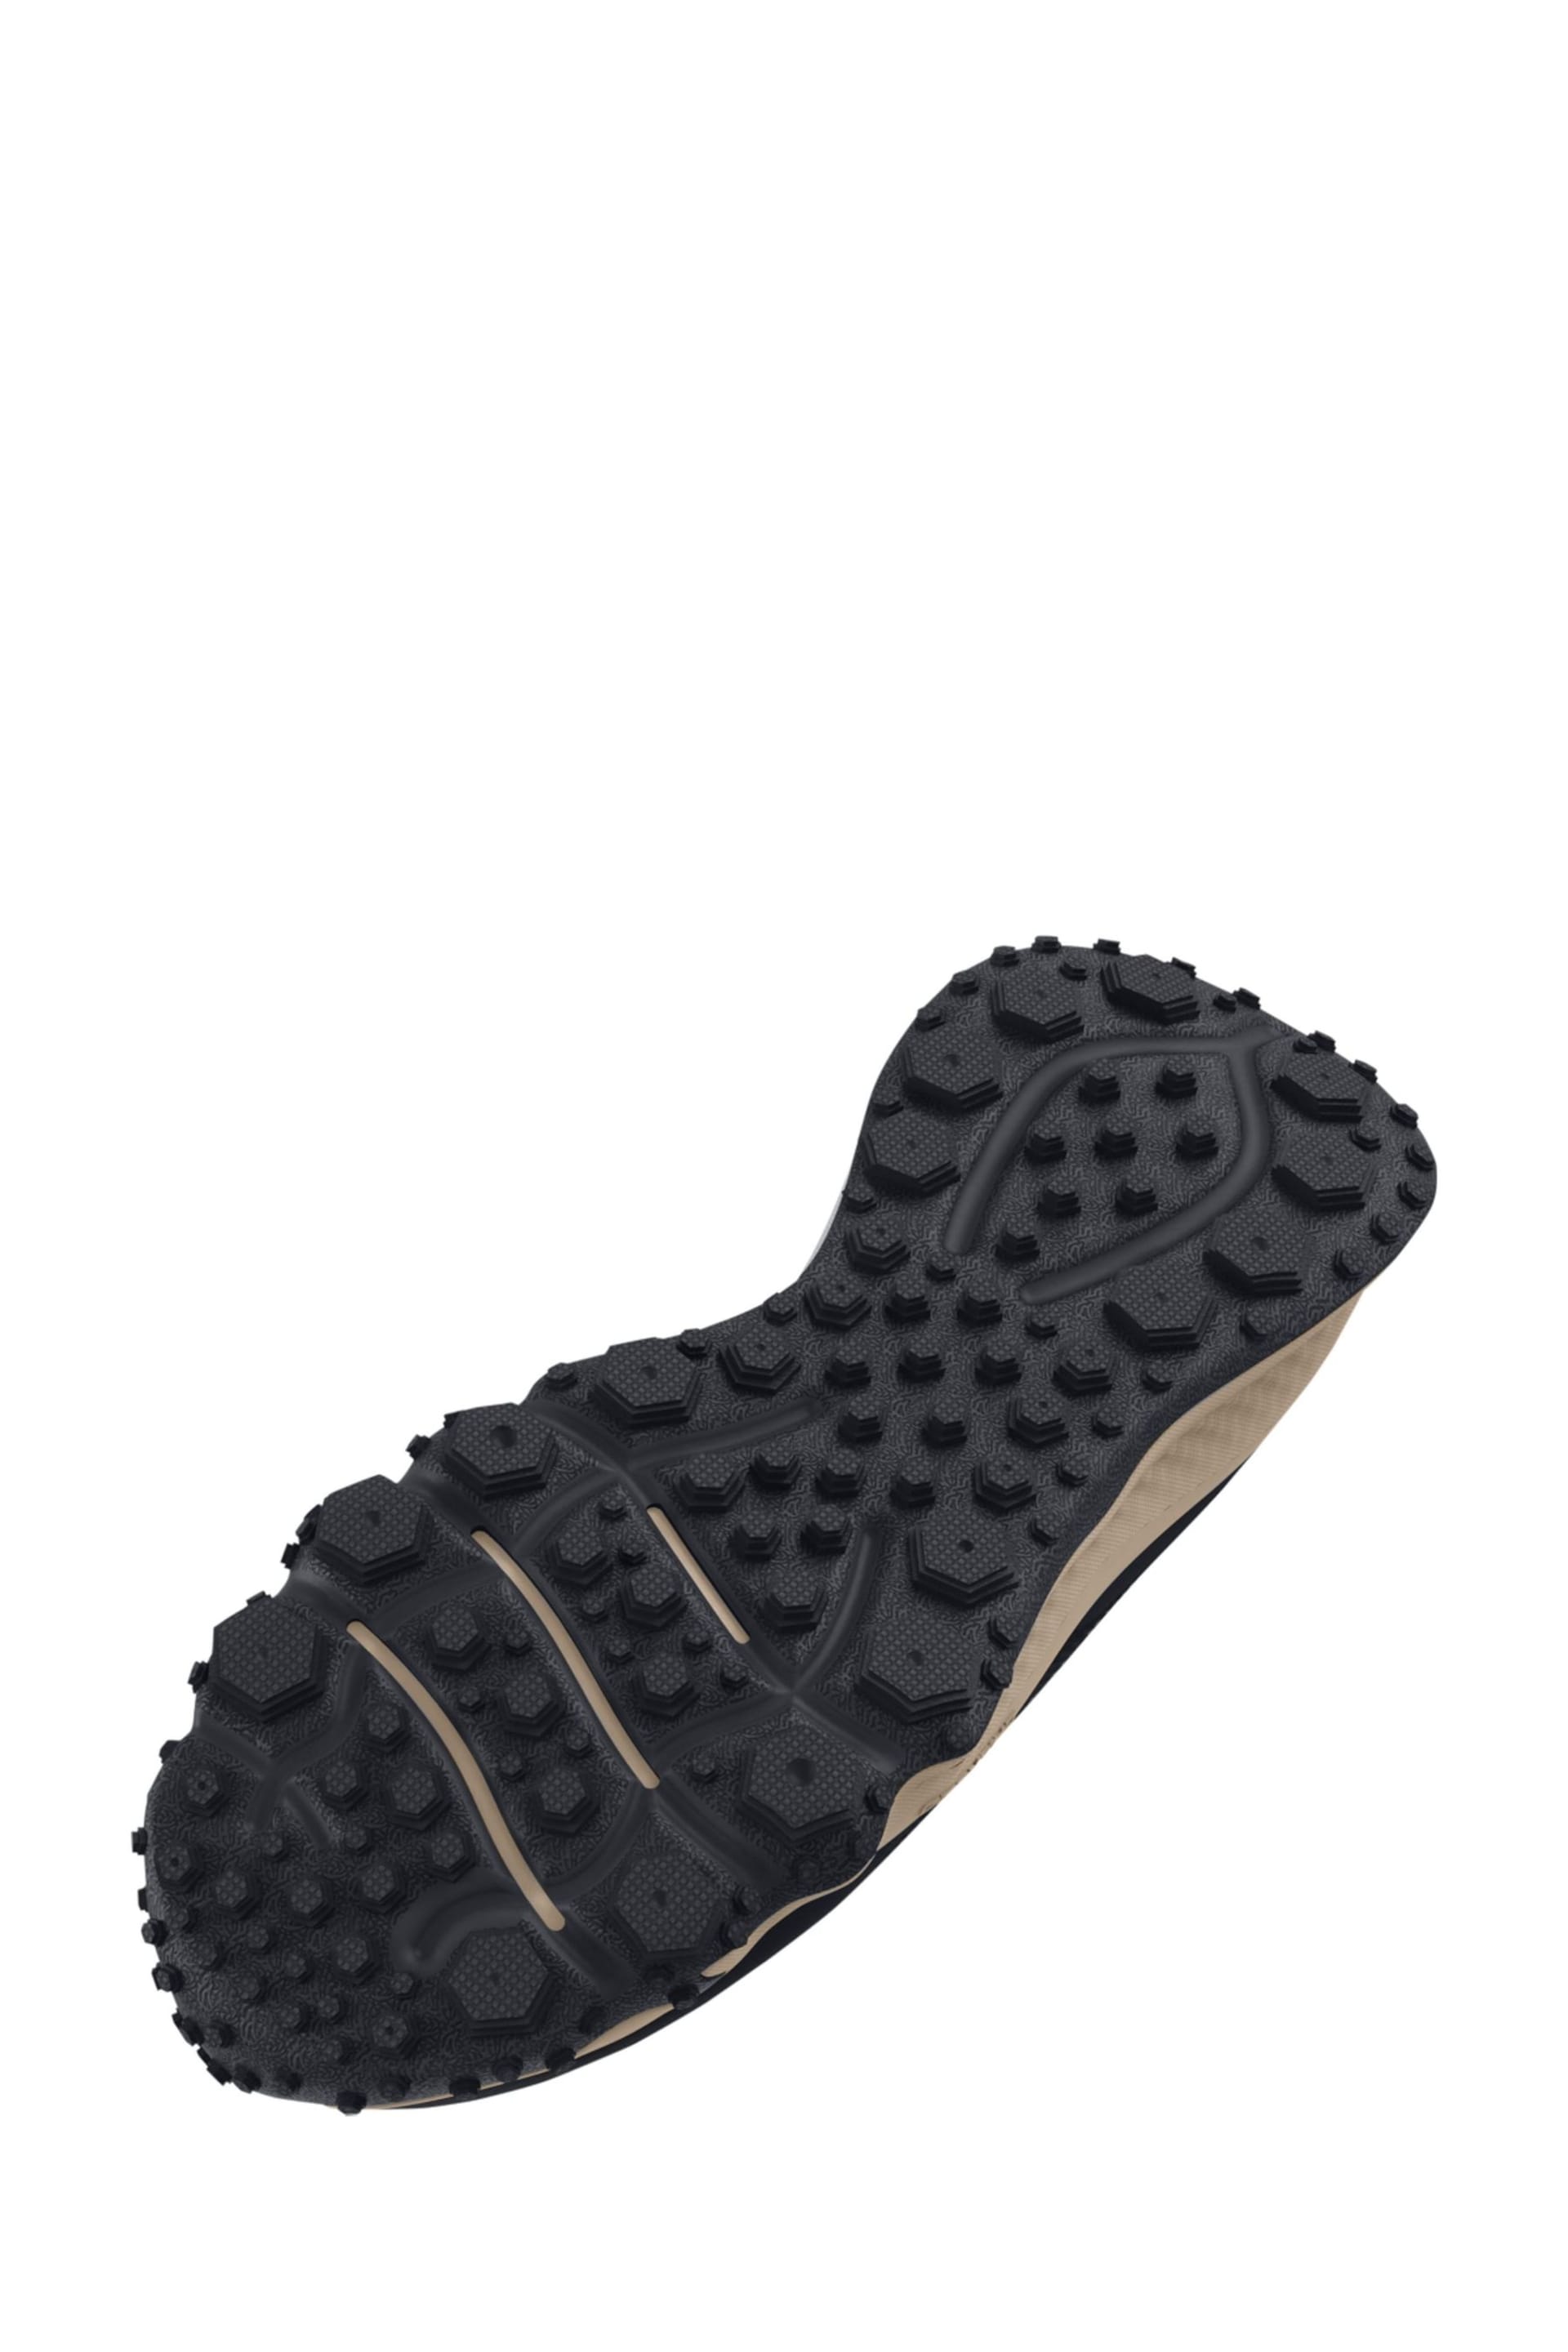 Under Armour Charged Maven Trail Black Trainers - Image 5 of 7